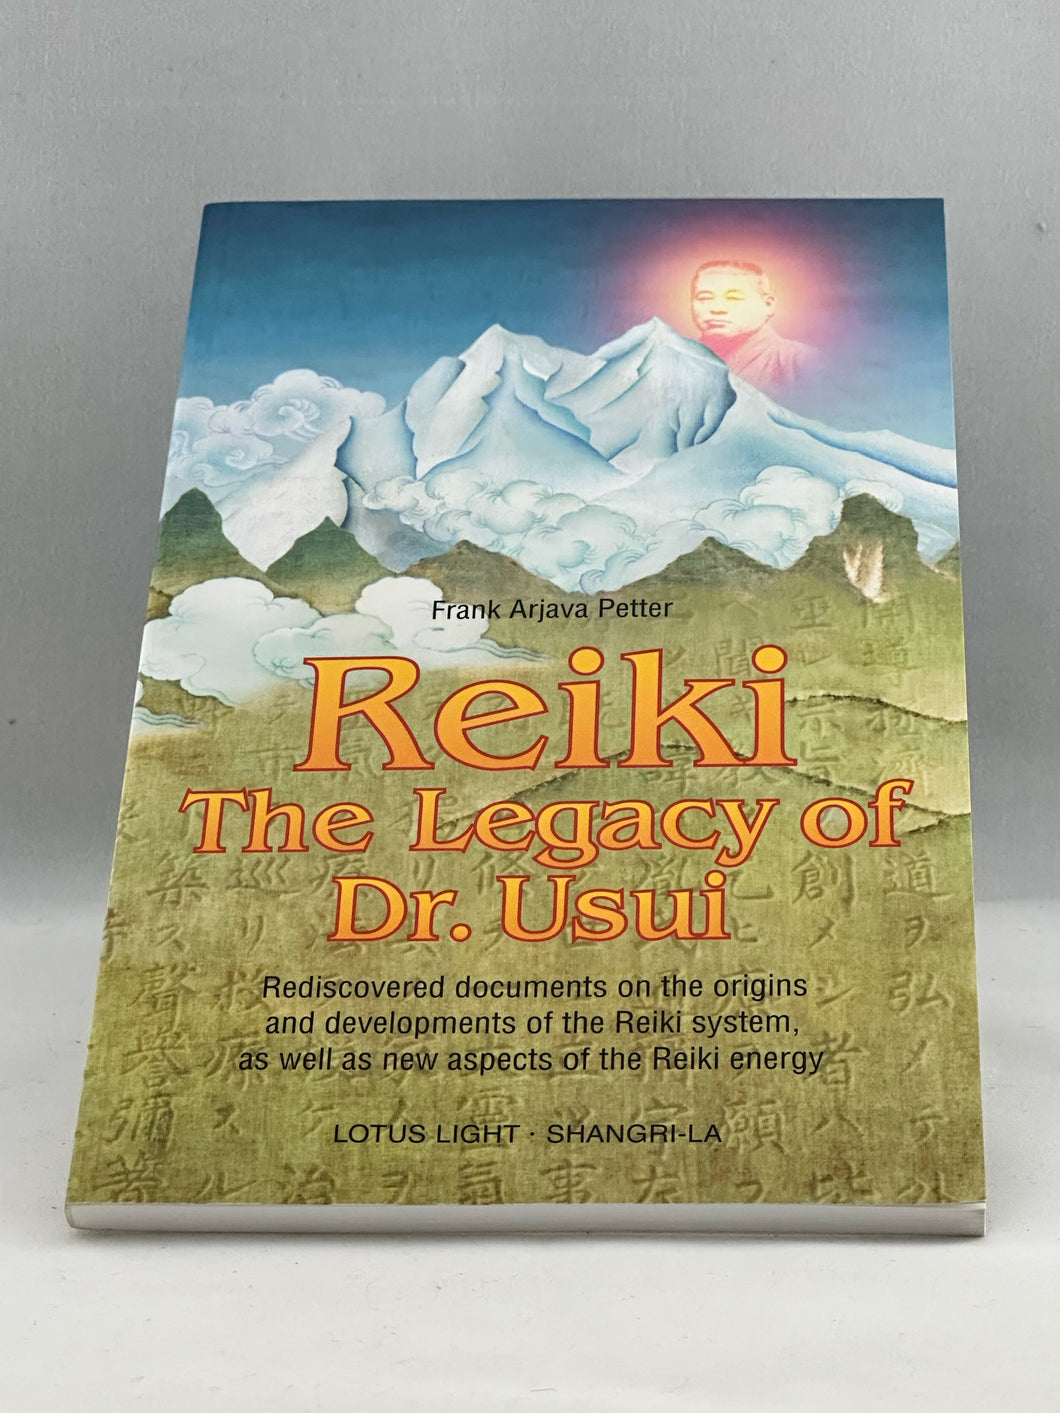 Reiki - The Legacy of Dr. Usui